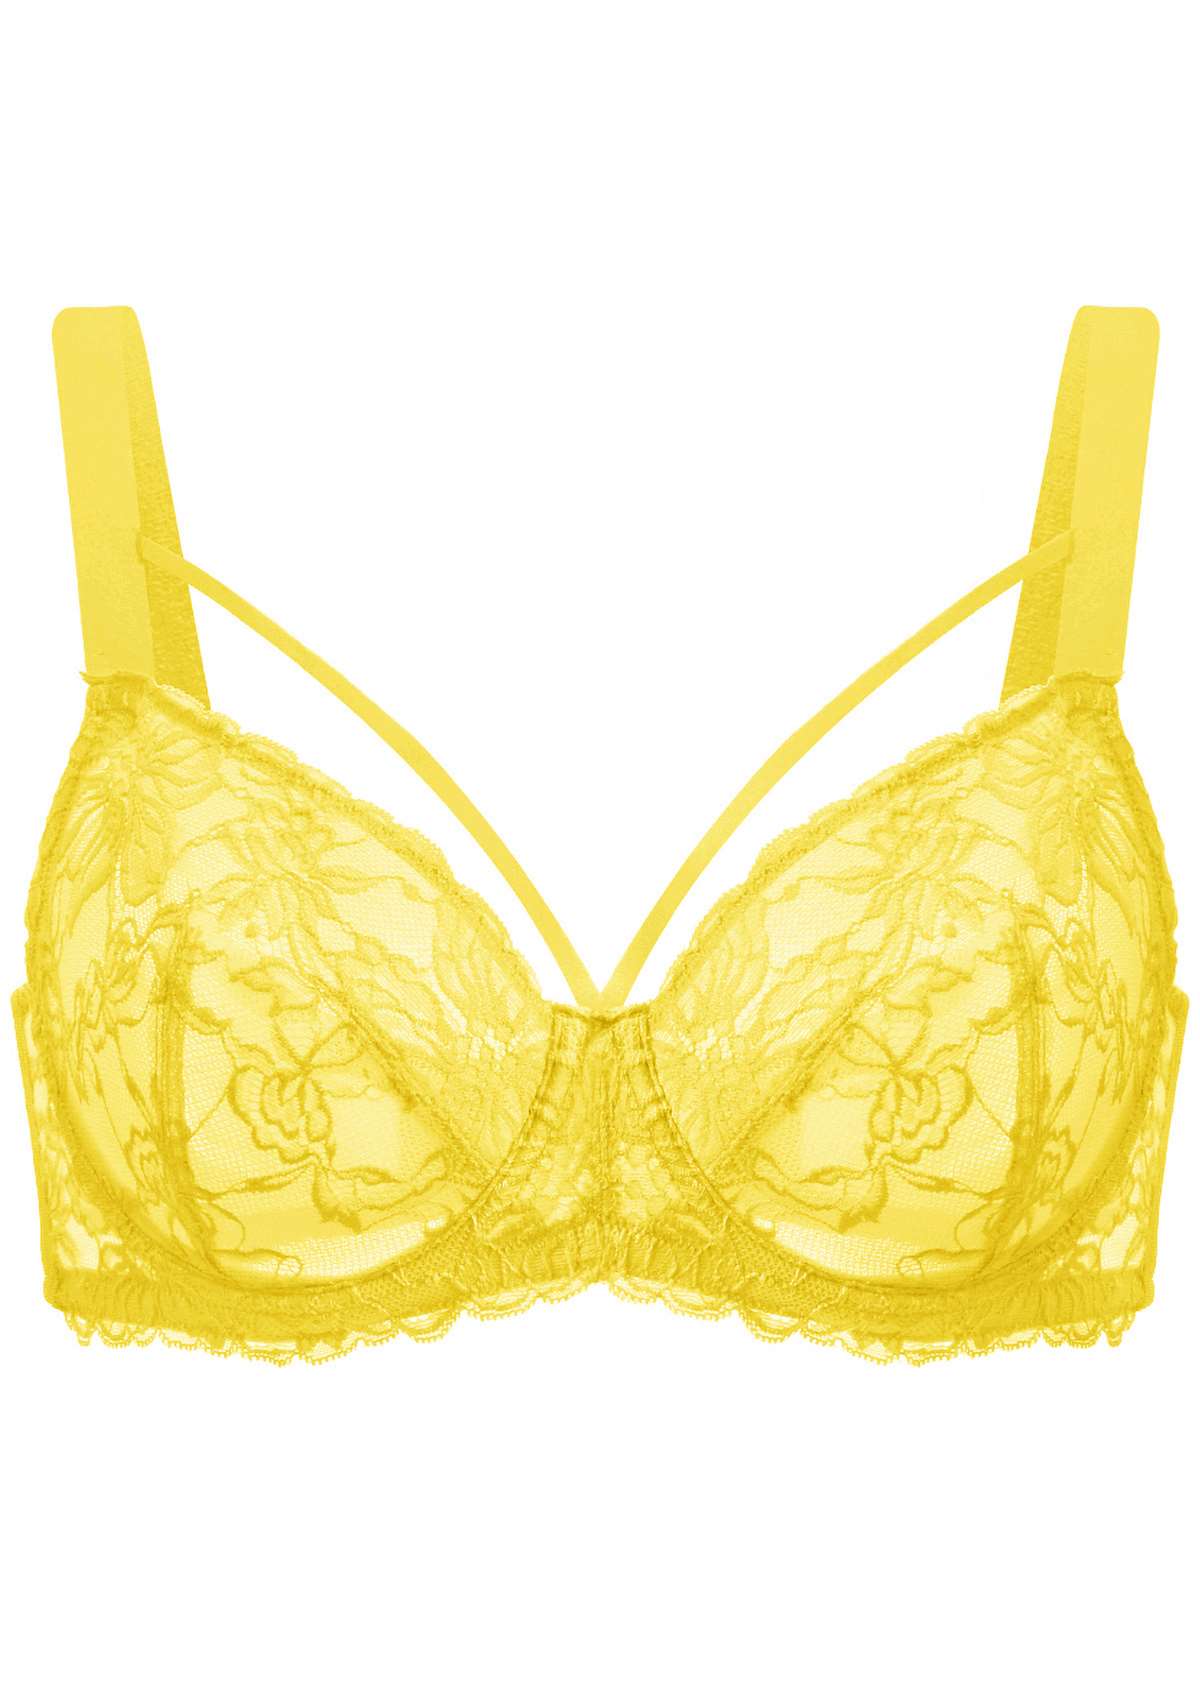 HSIA Unlined Lace Mesh Minimizer Bra For Large Breasts, Full Coverage - Bright Yellow / 42 / DD/E